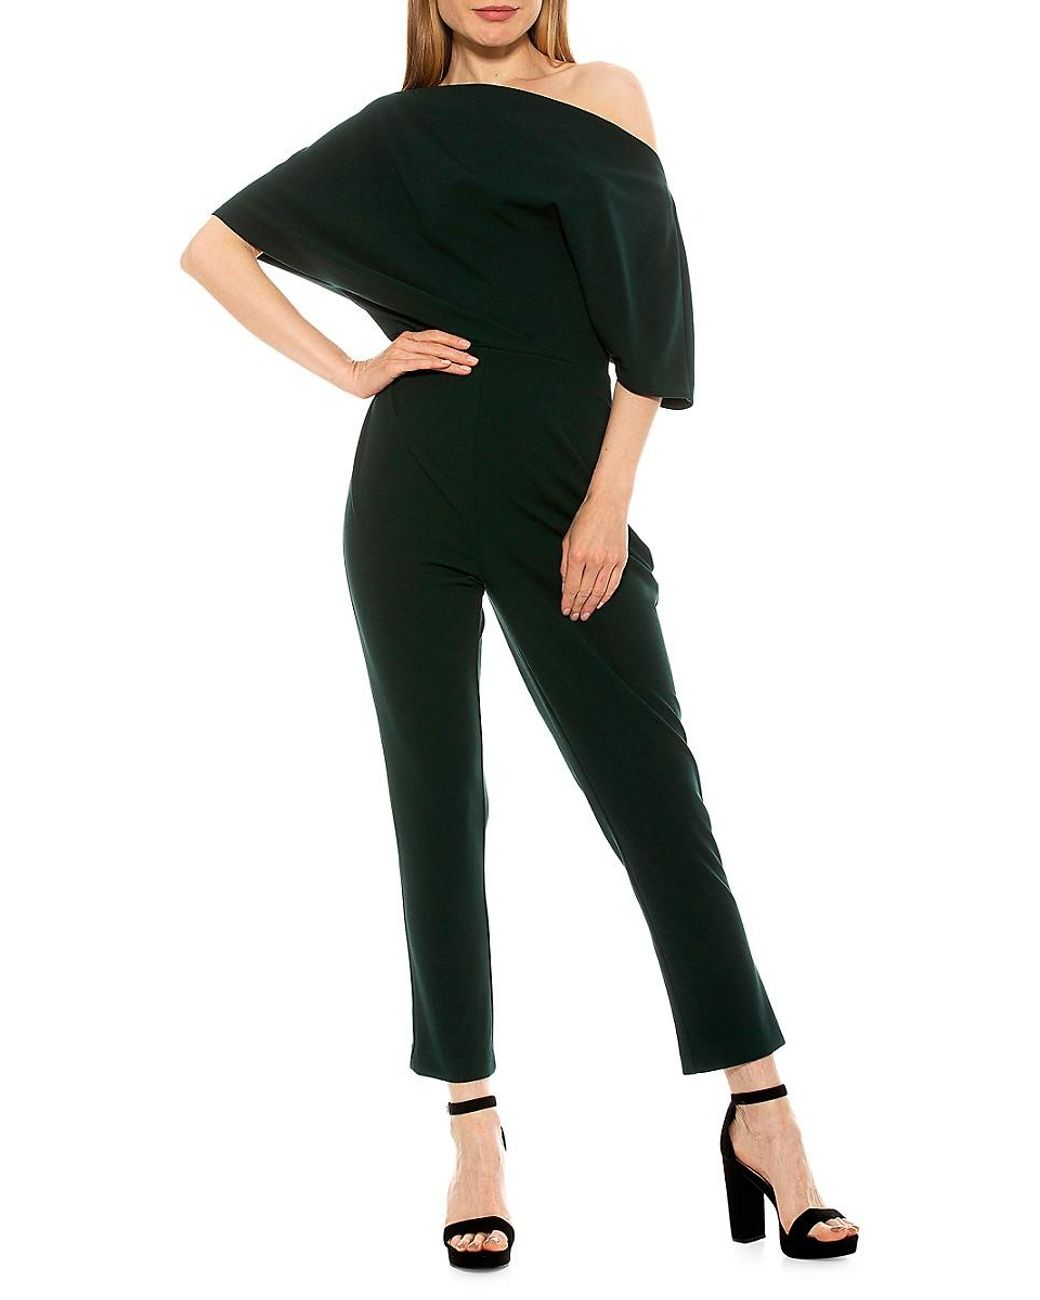 Alexia Admor Synthetic Draped One-shoulder Jumpsuit in Emerald (Green ...